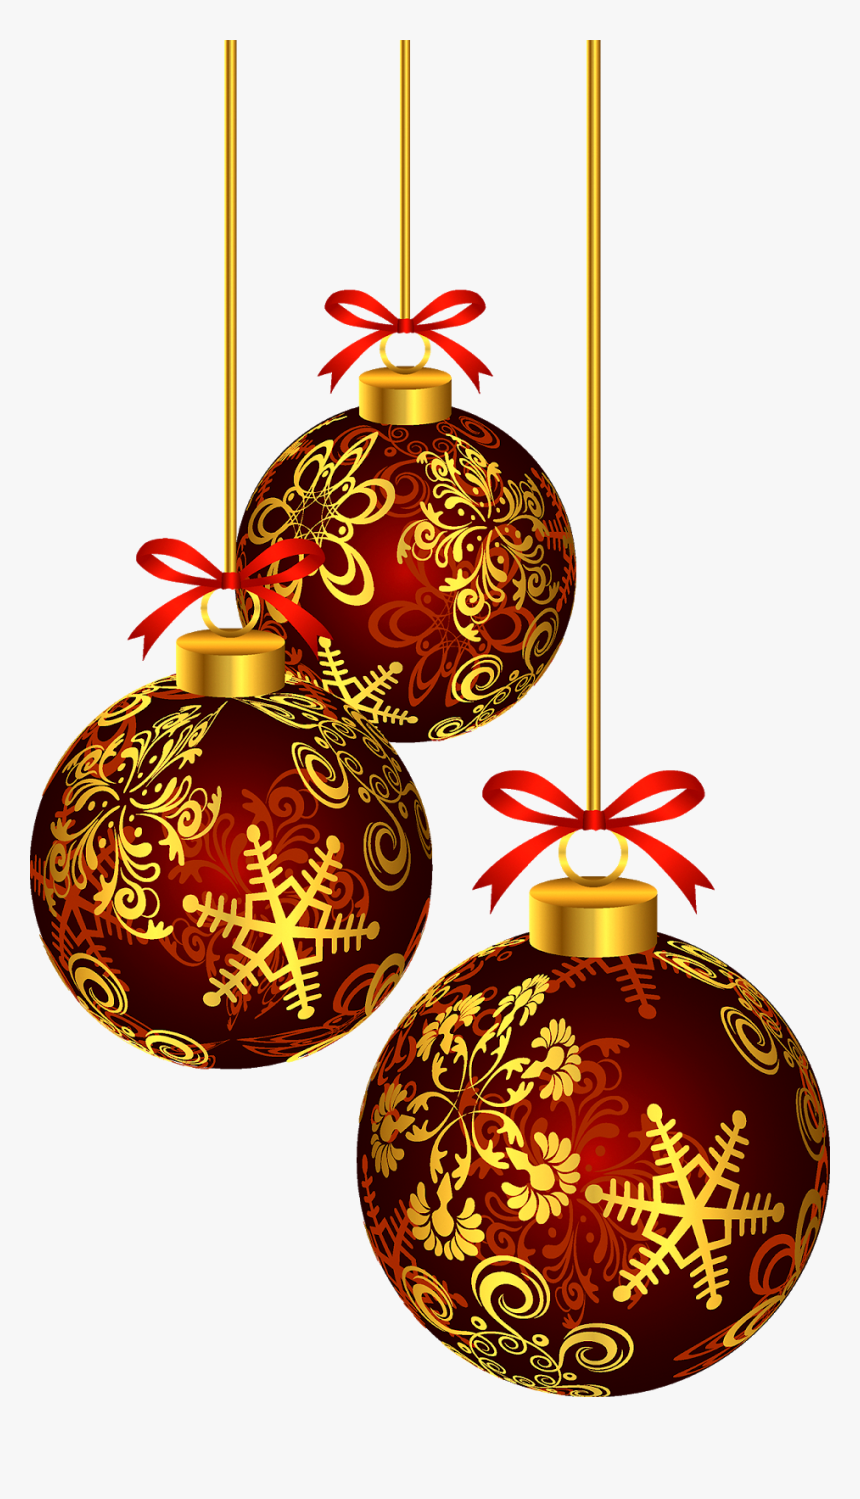 Christmas New Year Golden Ball - Christmas Ball Png File, Transparent Png, Free Download